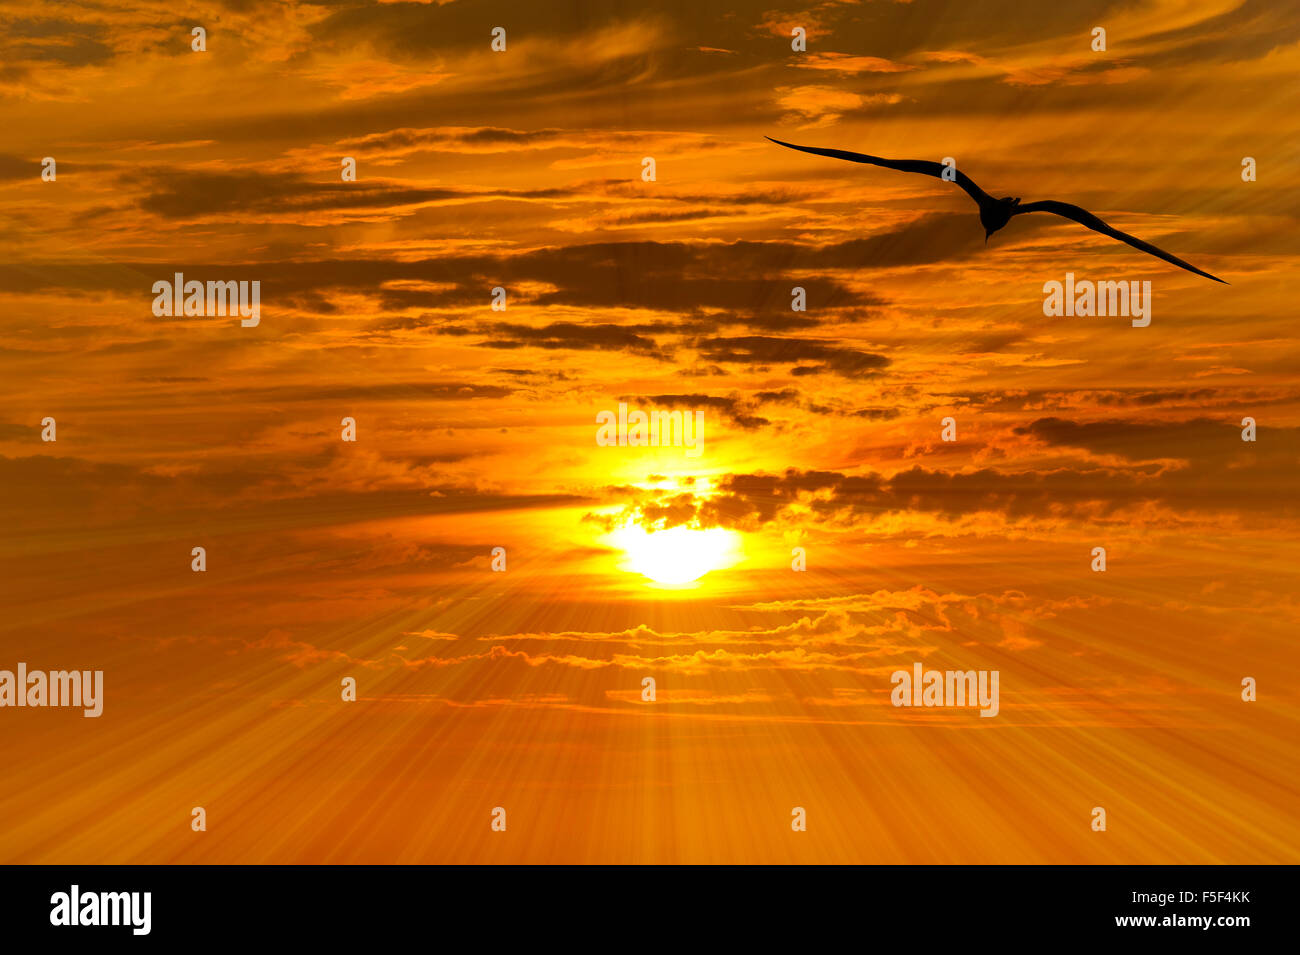 Bird flying silhouette with an orange and yellow sunset beaming in the background Stock Photo